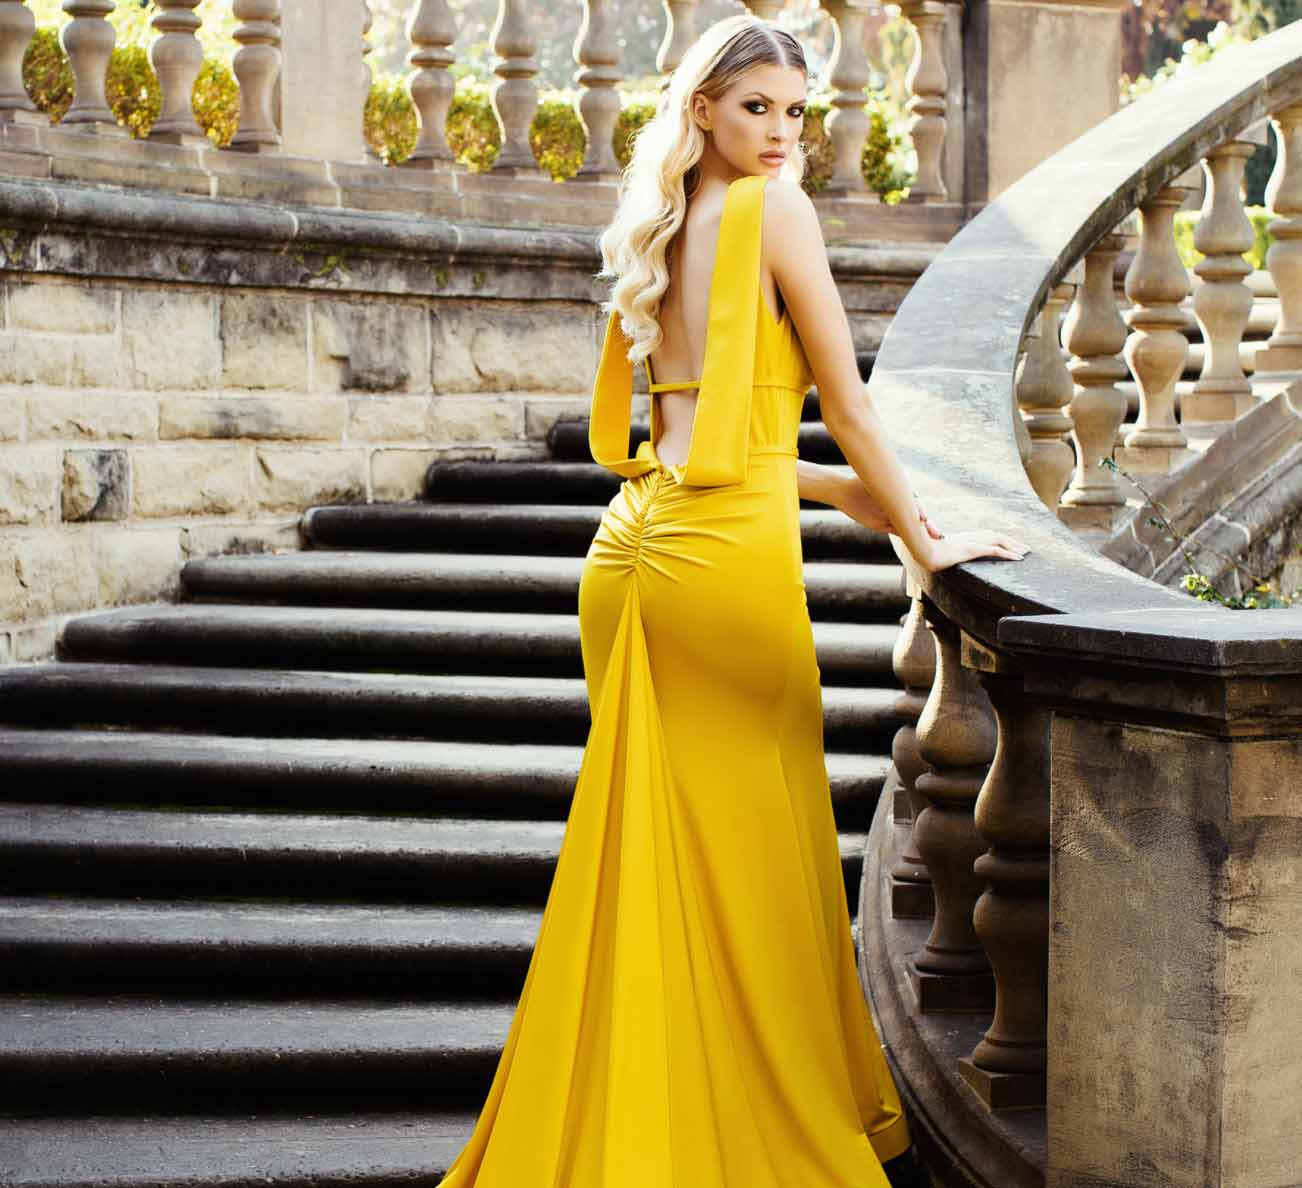 Model wearing a yellow gown. Mobile image